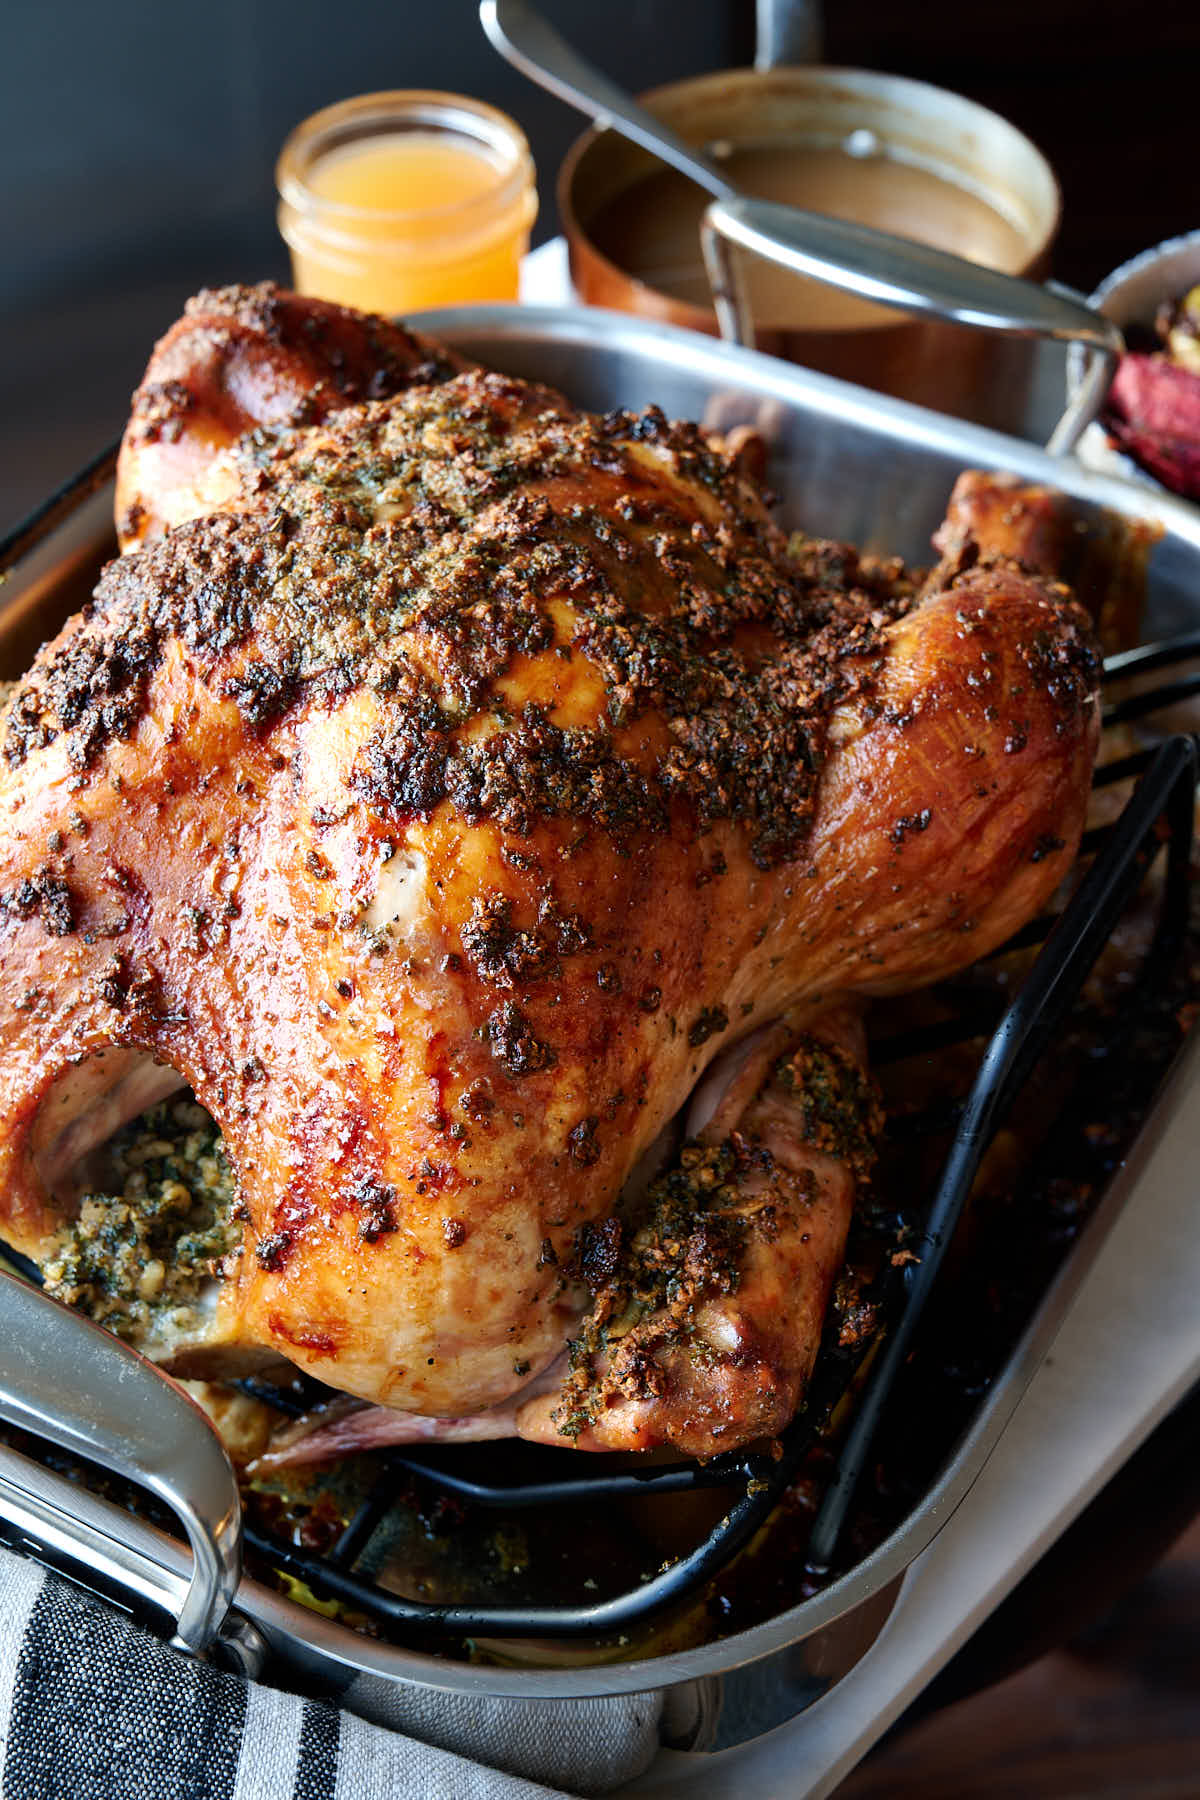 The best rurkey period. Injected with herb-infused butter and rubbed with a delicious mix of garlic, herbs, salt and pepper, this roasted turkey is scrumptious.